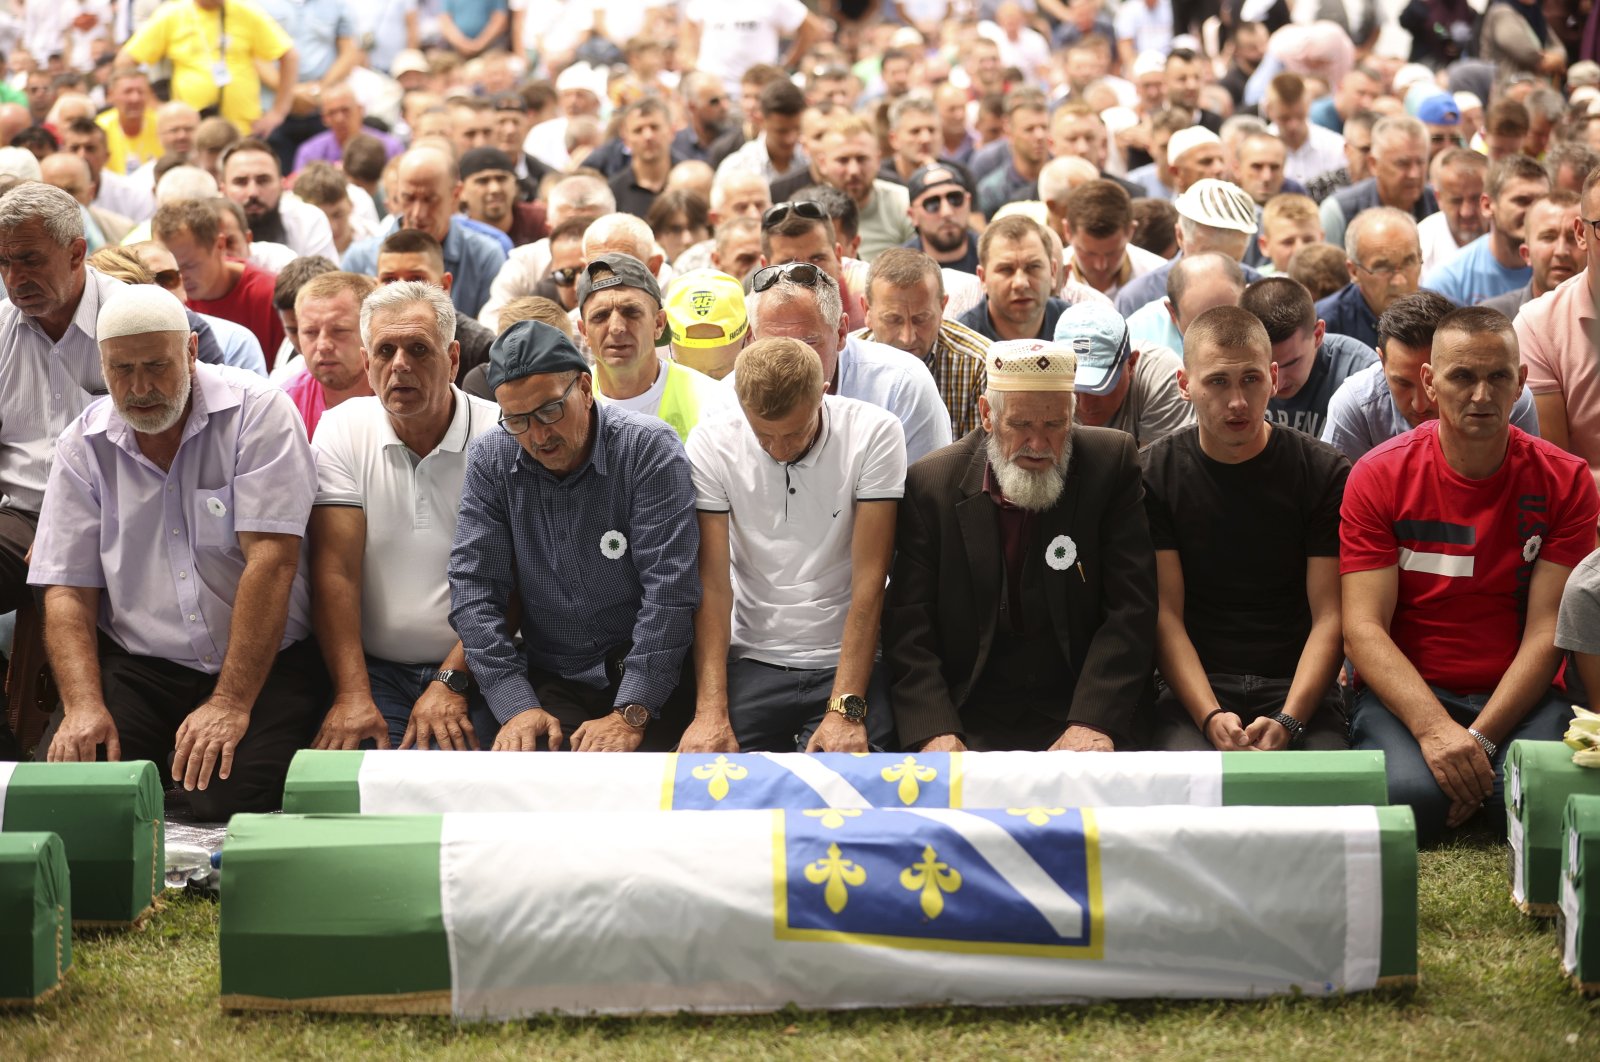 Bosnian muslim men pray next to the coffins containing the remains of 50 newly identified victims of the Srebrenica Genocide, Potocari, Bosnia-Herzegovina, July 11, 2022. (AP Photo)